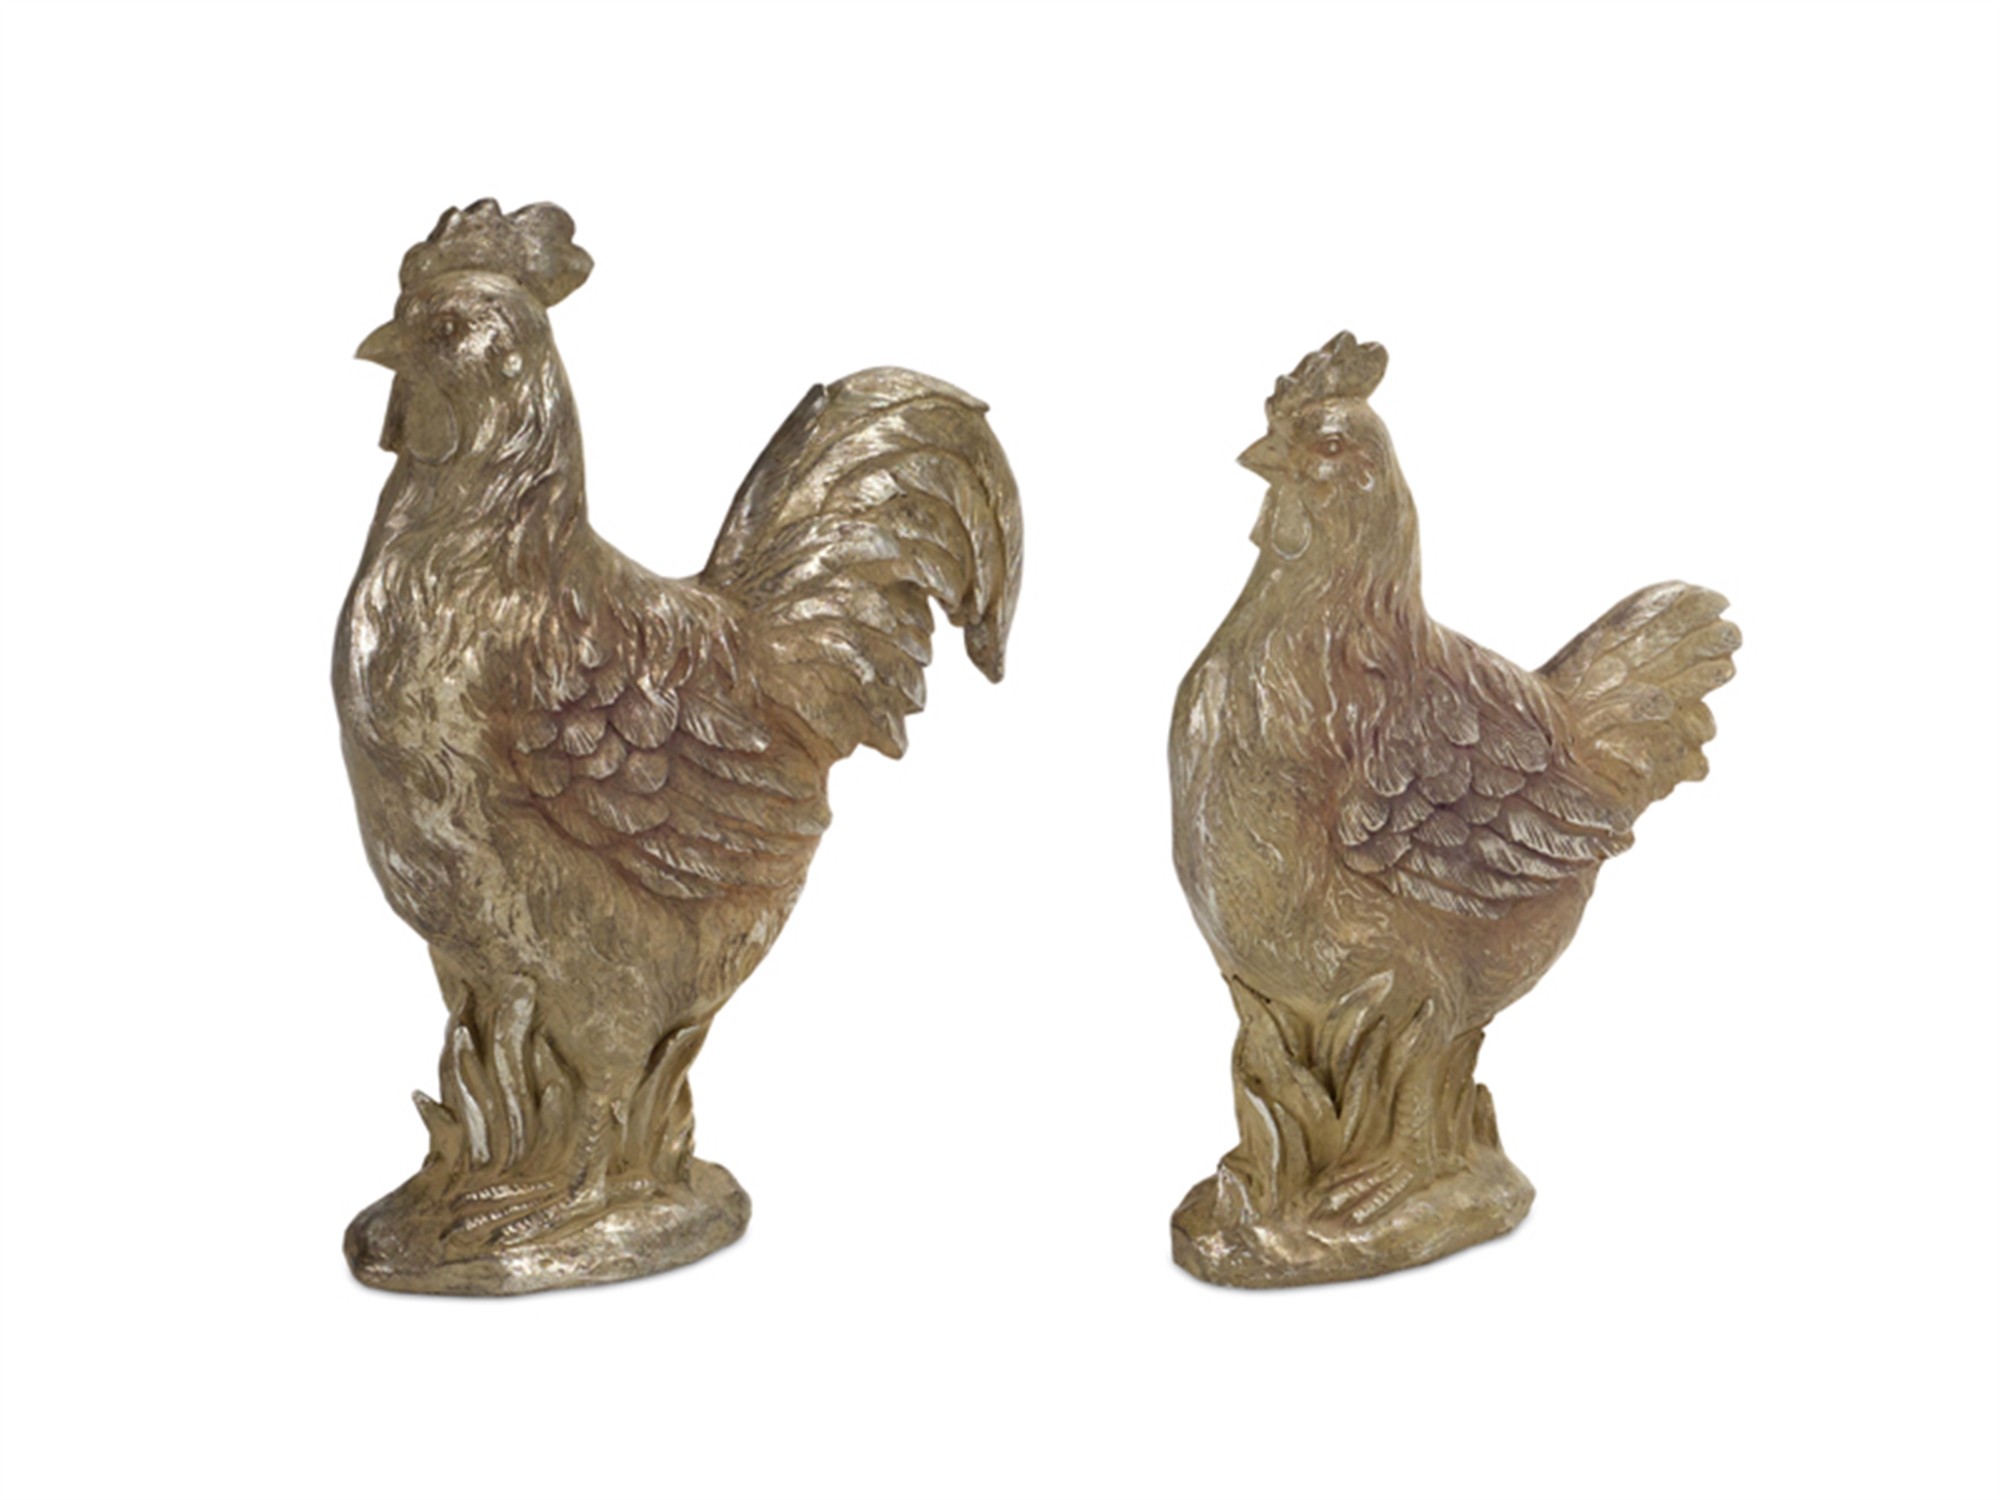 Chicken/Rooster (Set of 2) 11"H, 12.5"H Resin